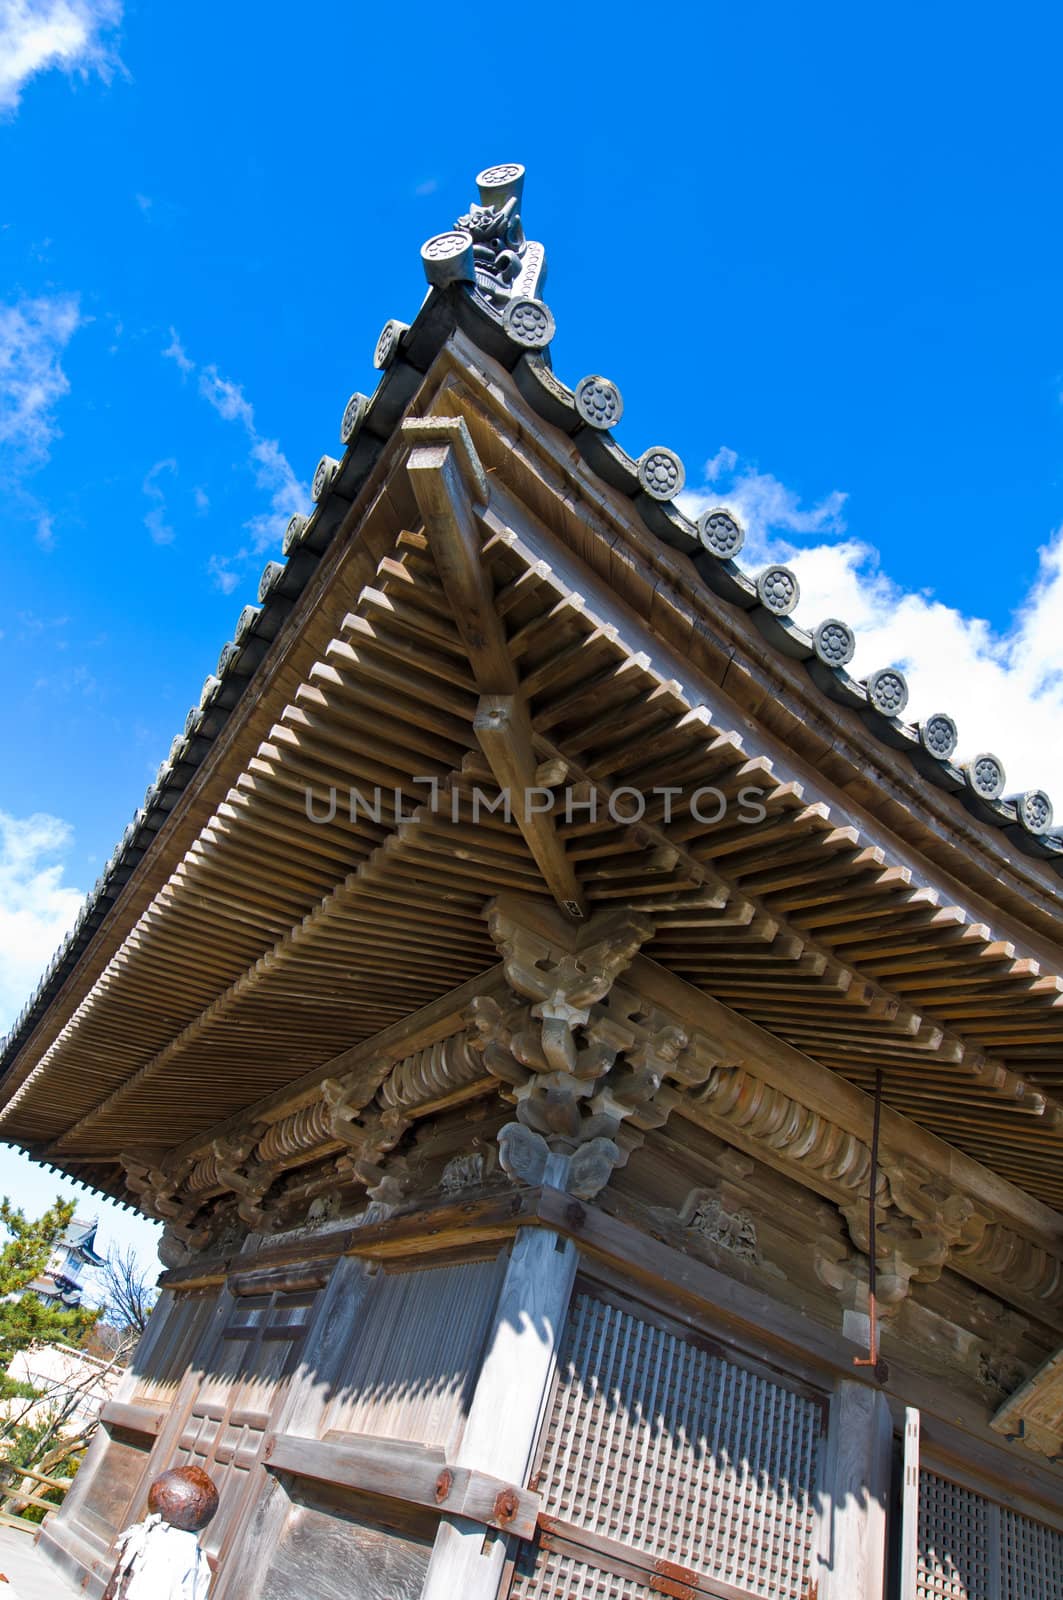 Side view on a teahouse in Japan under blue sky